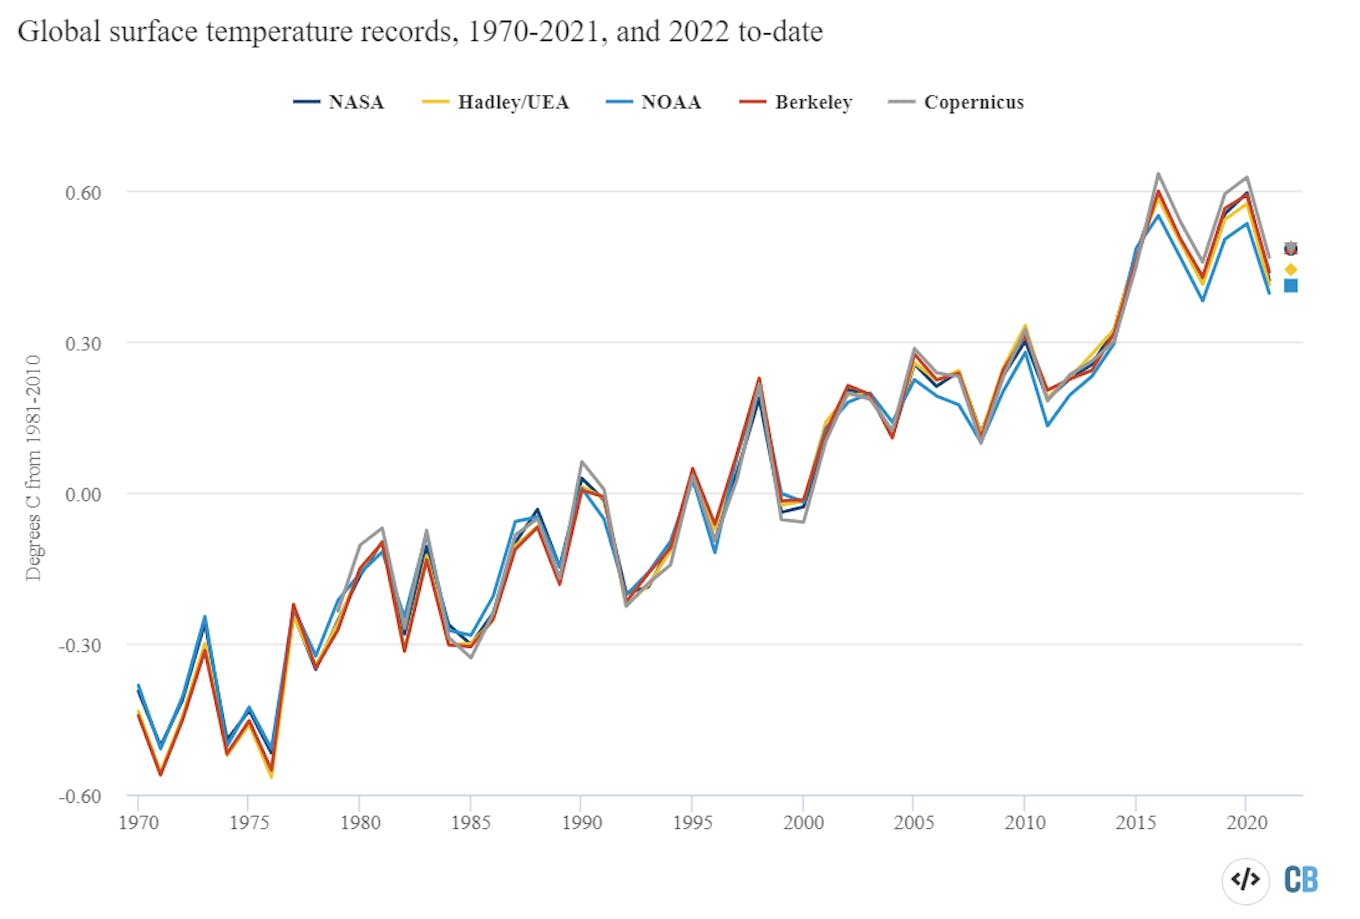 Annual global mean surface temperatures